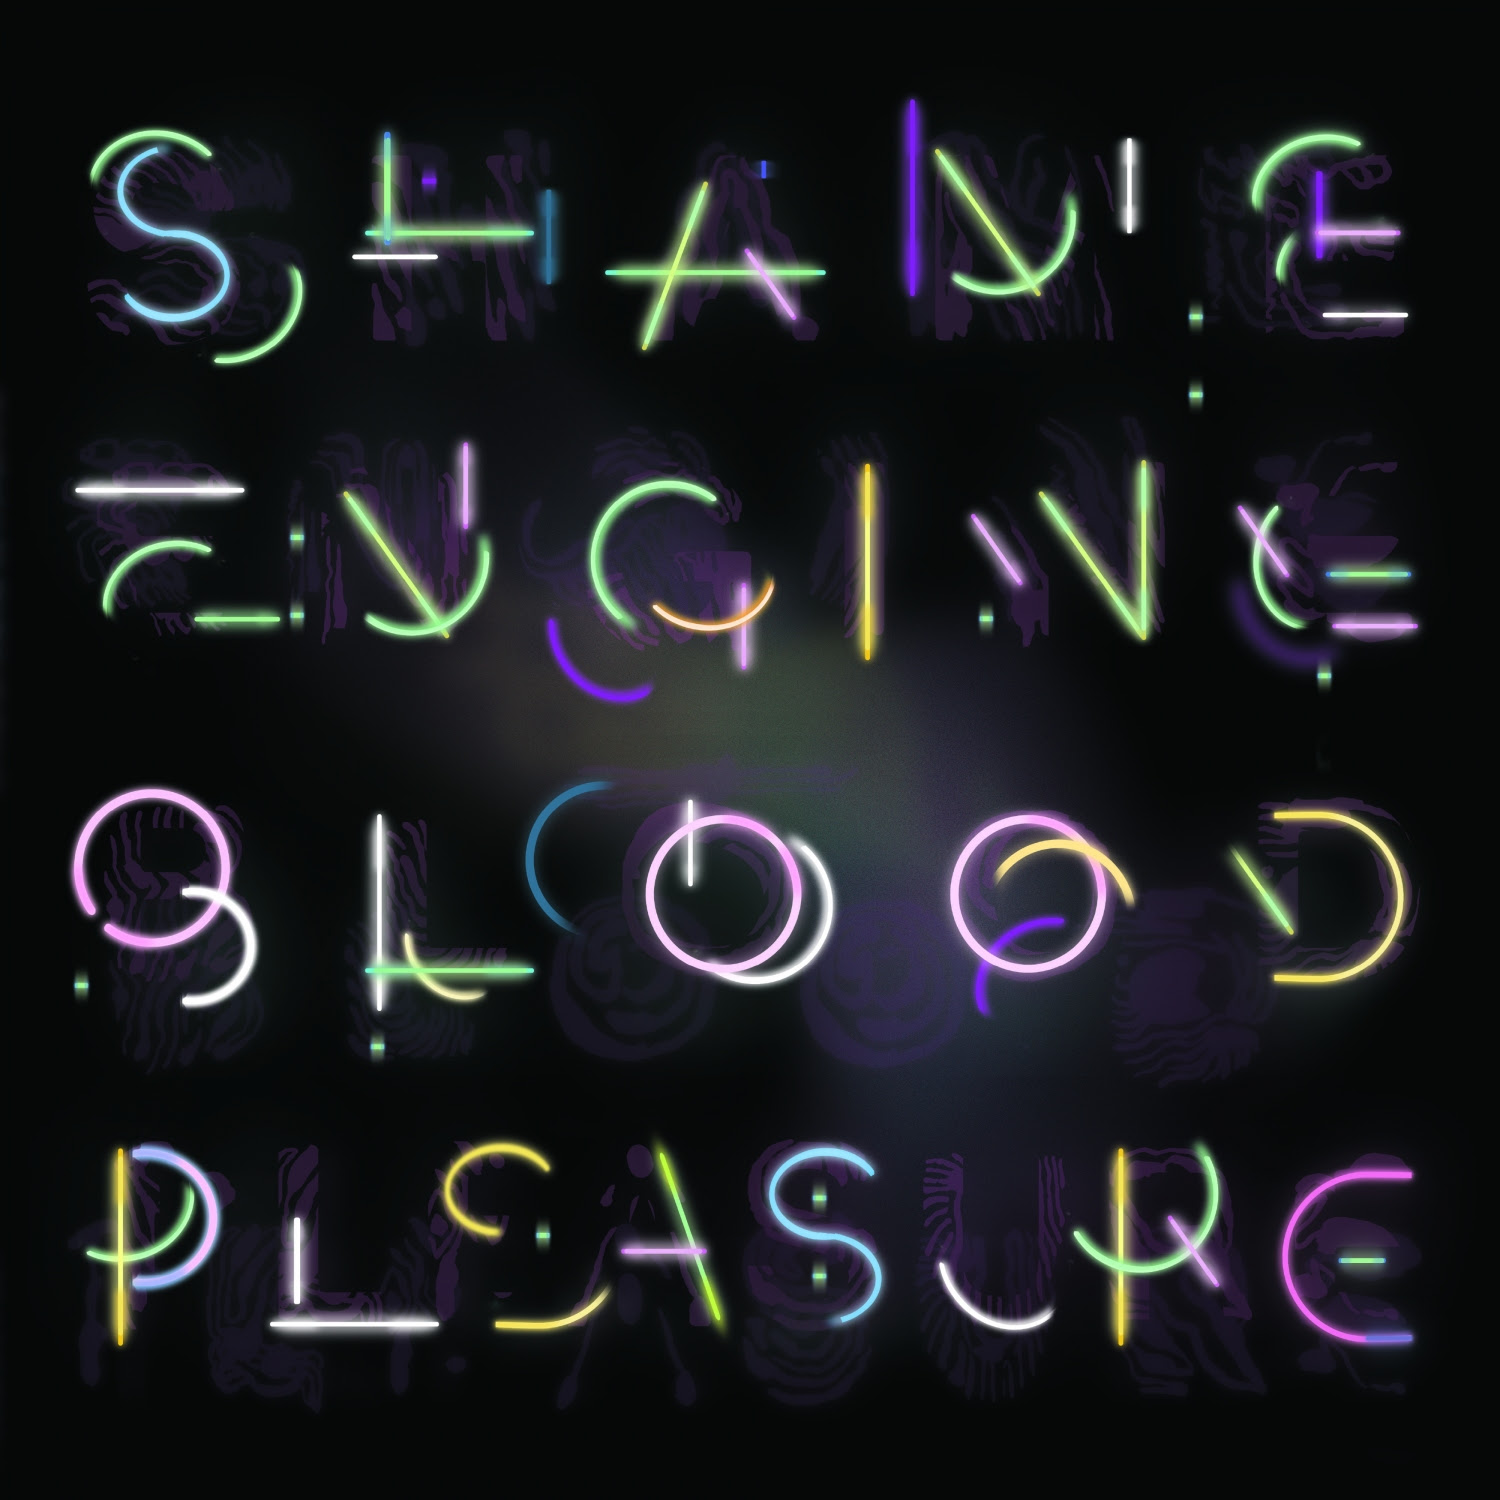 HEALTH&BEAUTY have announced their new album, Shame Engine / Blood Pleasure, will be available on November 22, via Wichita Recordings